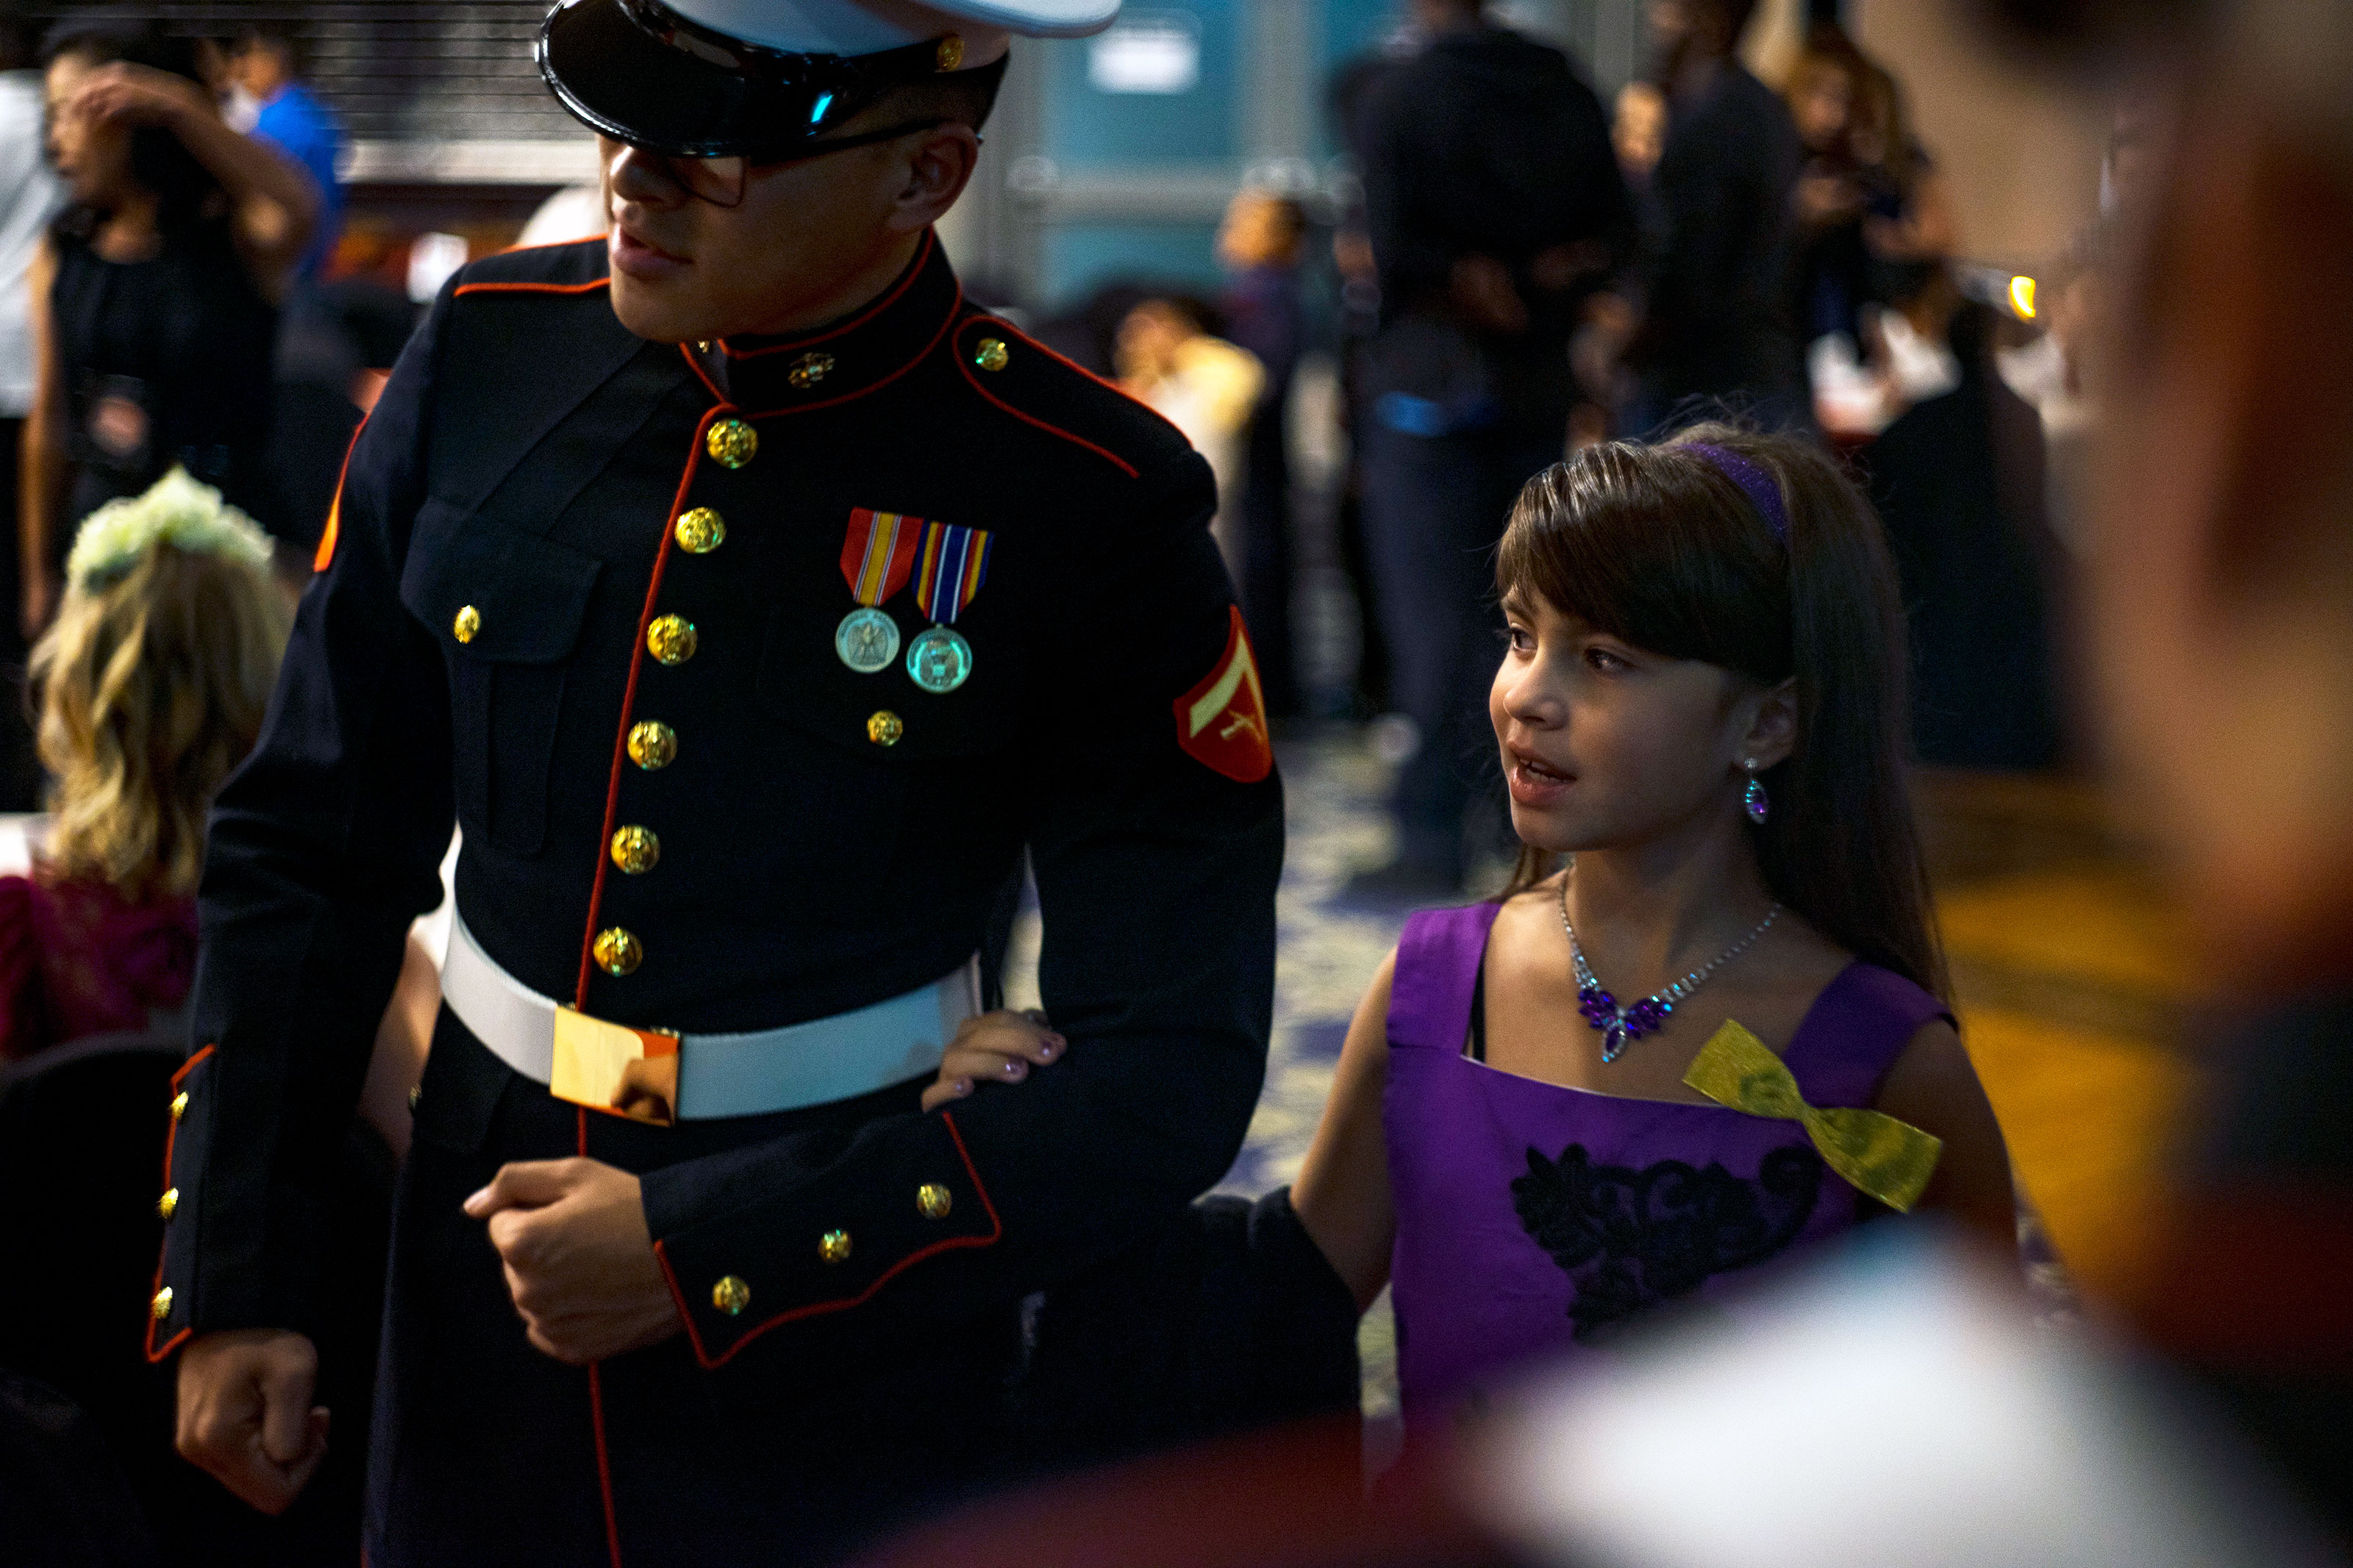 A U.S. Marine escorts a child to her seat during the Seventh Annual Mini Marine Corps and Navy Ball at Marine Corps Air Station Iwakuni, Japan, Oct. 21, 2017.  (U.S. Marine Corps/Donato Maffin)